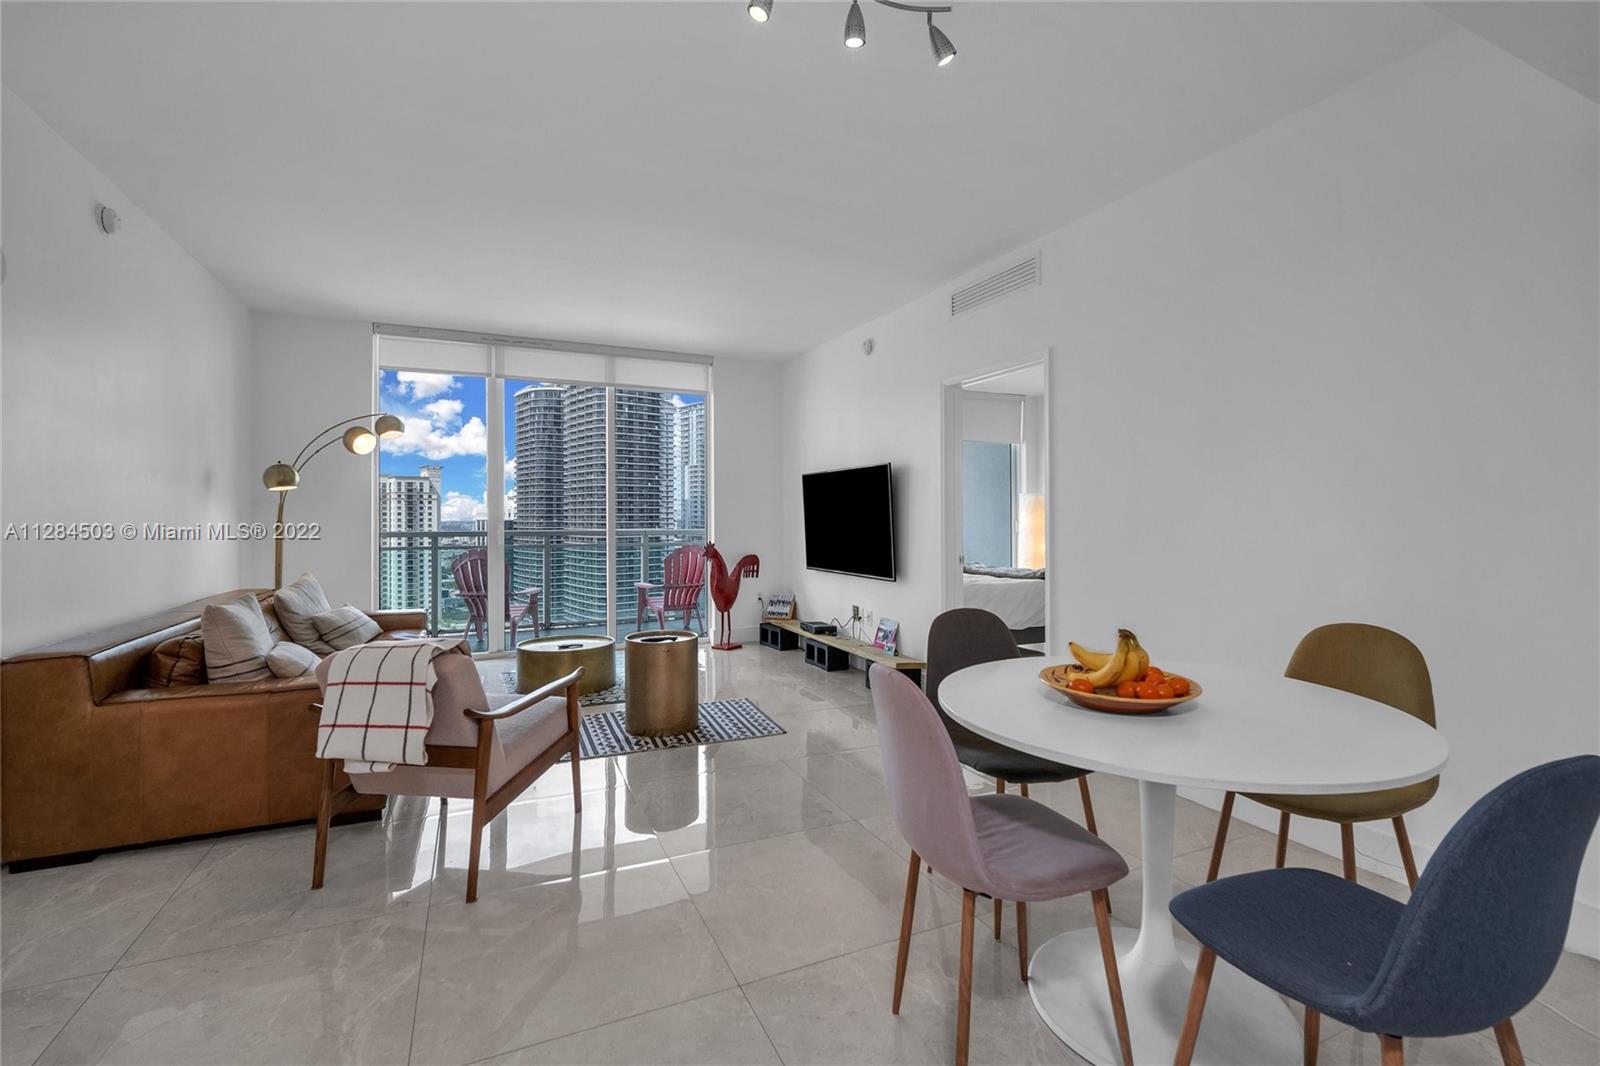 Enjoy Brickell living at its finest! Centrally located, spacious split floorplan 2 bed 2 bath. This 